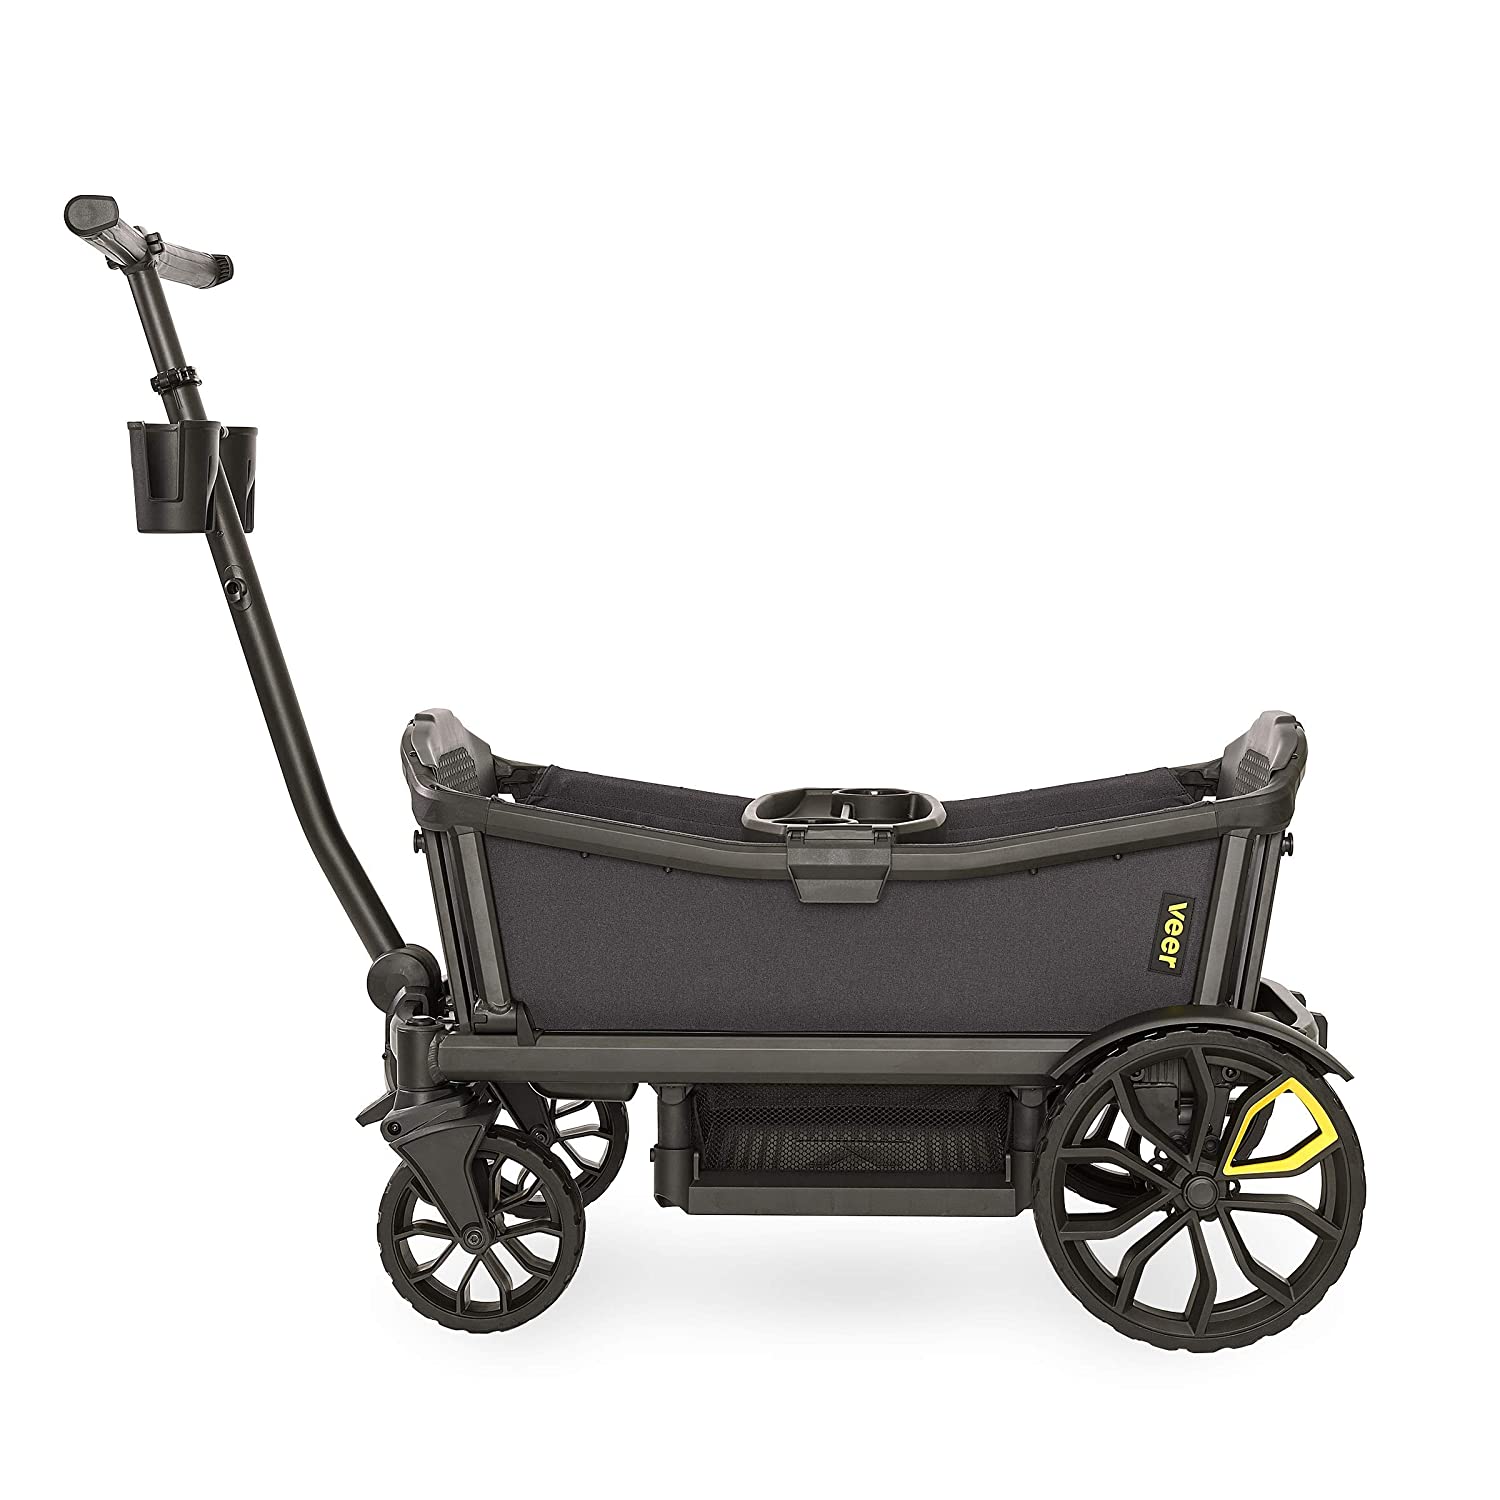 Top 10 Best Wagons for Kids Reviews in 2023 9